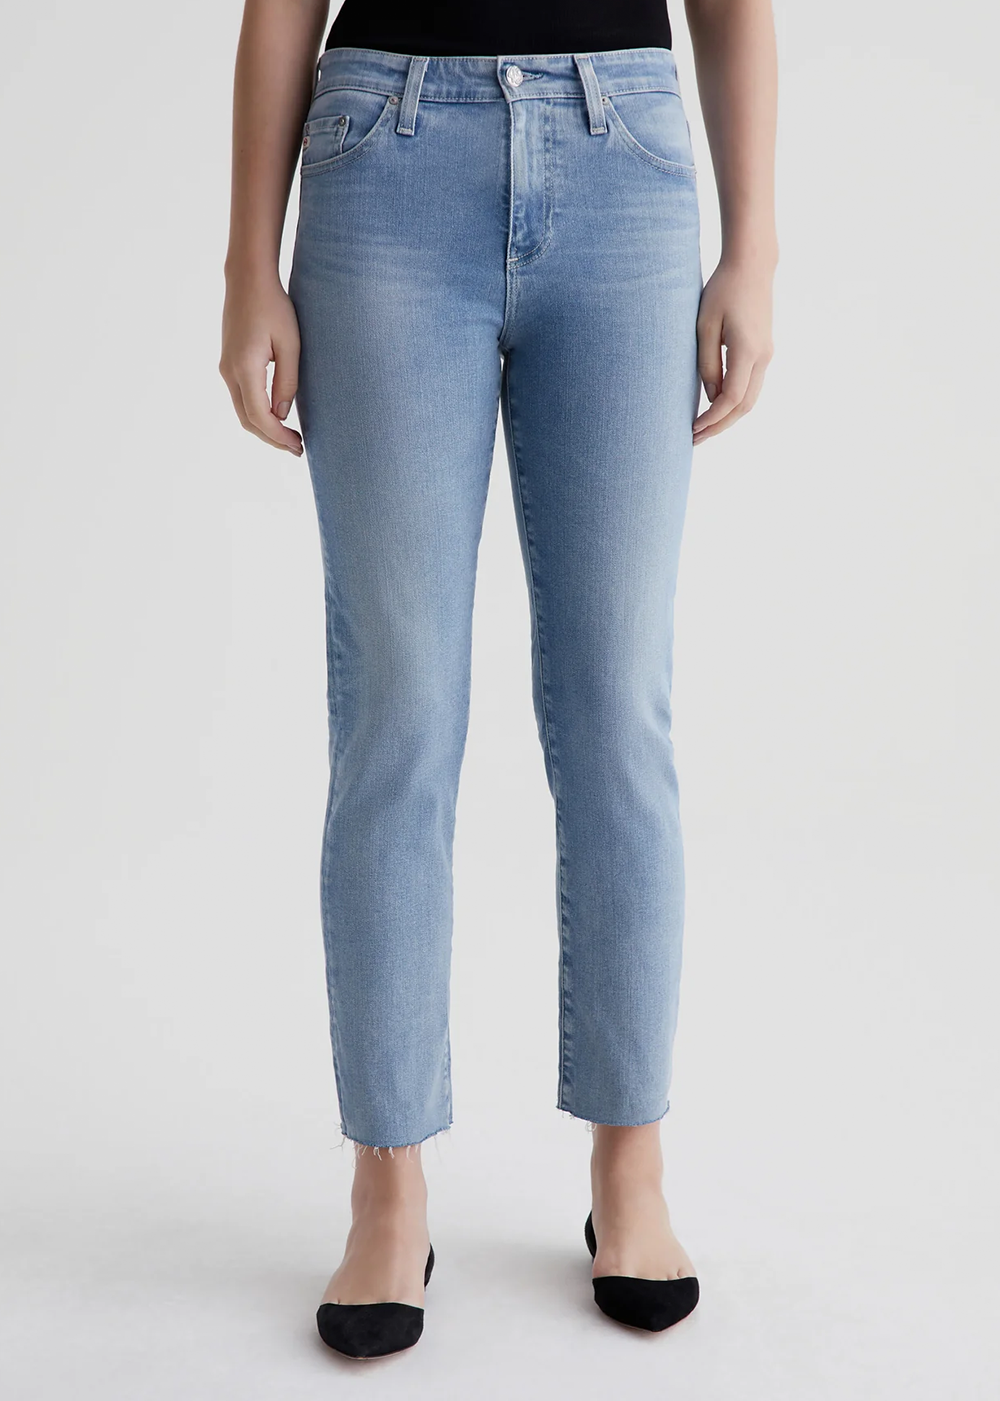 Front view of the Mari Crop Jeans by AG Jeans showcasing the high-rise slim straight fit that's cropped just above the ankle.